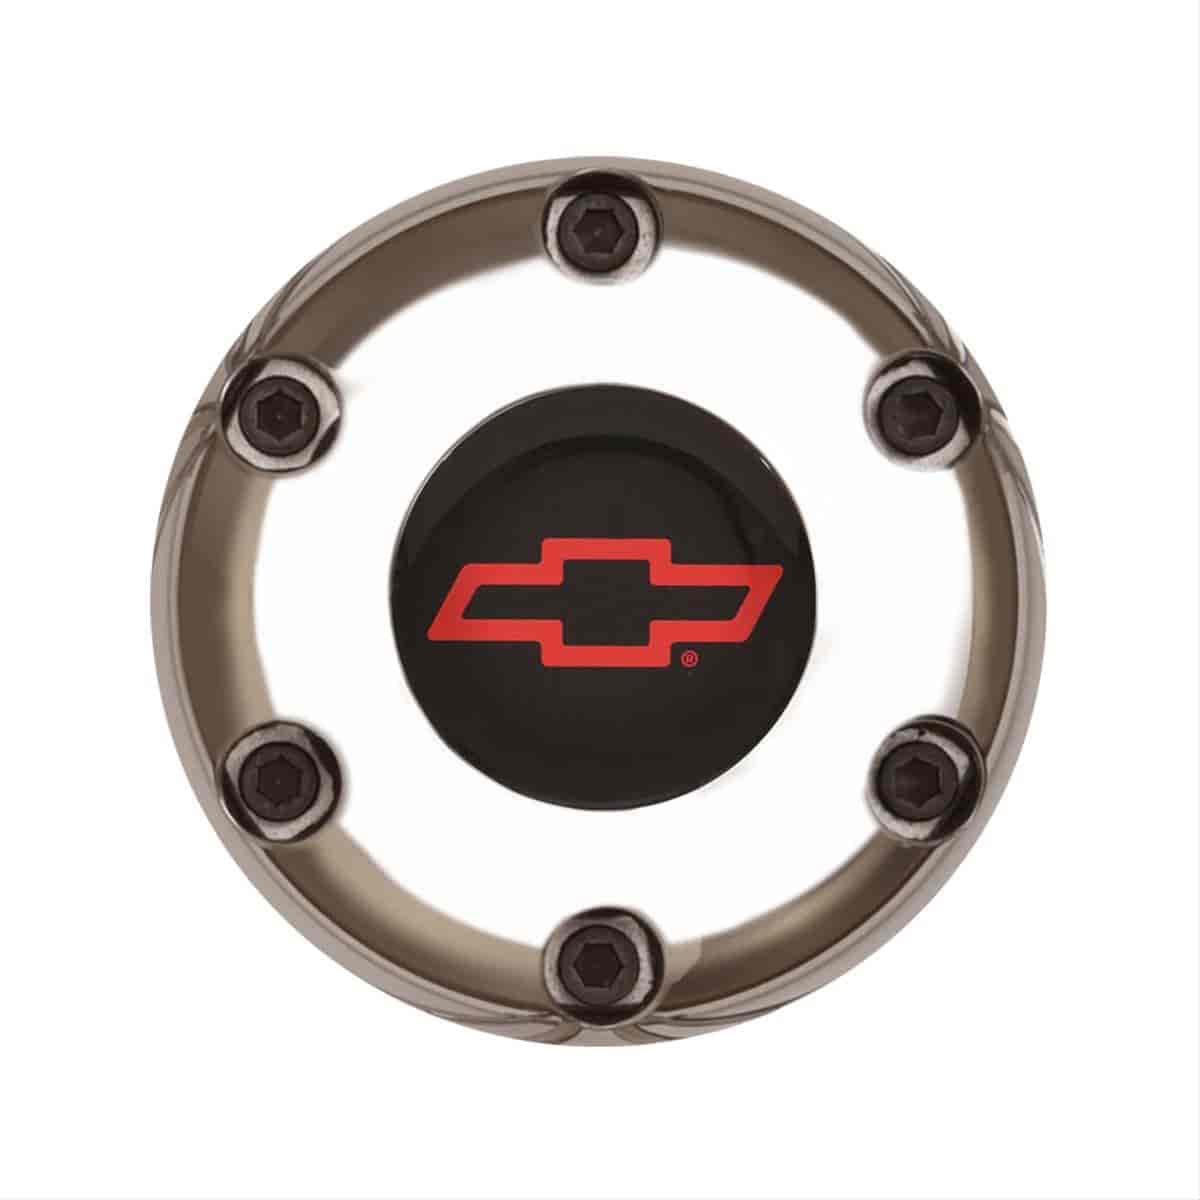 GT3 Gasser/Euro Style Horn Button Chevy Bowtie Colored 6-Hole Style Style Polished with Black Center